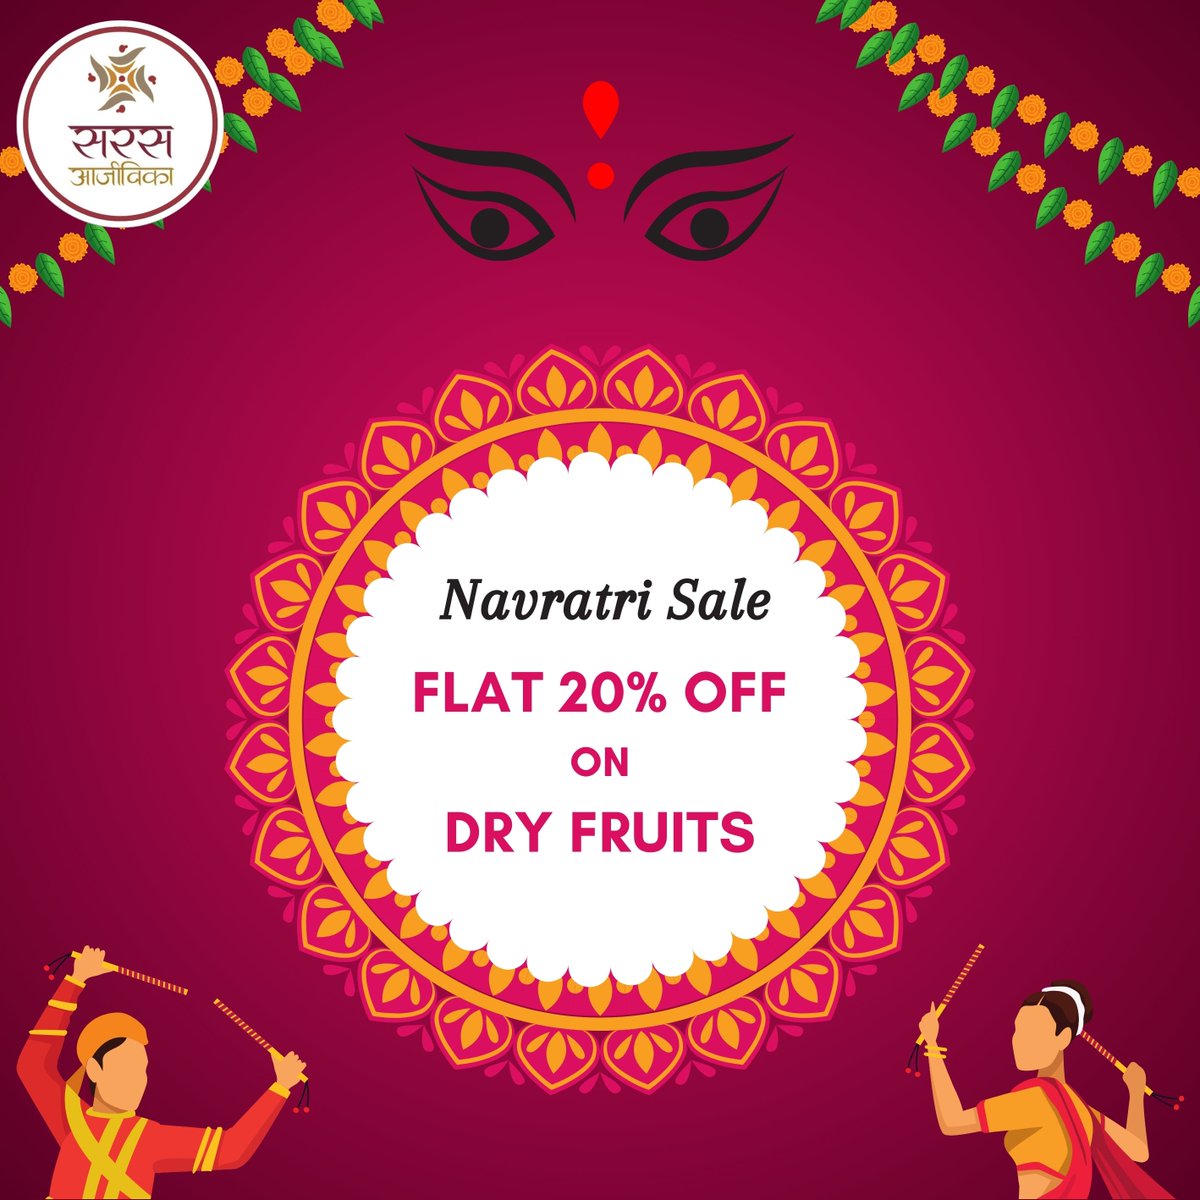 Dive into the flavors of Navratri with our special dry fruit sale at Saras Aajeevika Gallery!
Don't miss out on this opportunity to add a healthy twist to your festive celebrations. 
WhatsApp/Call: 092899 09002
#NavratriSale #DryFruits #Retail #TrendingNow  #FestiveFlavors #dry